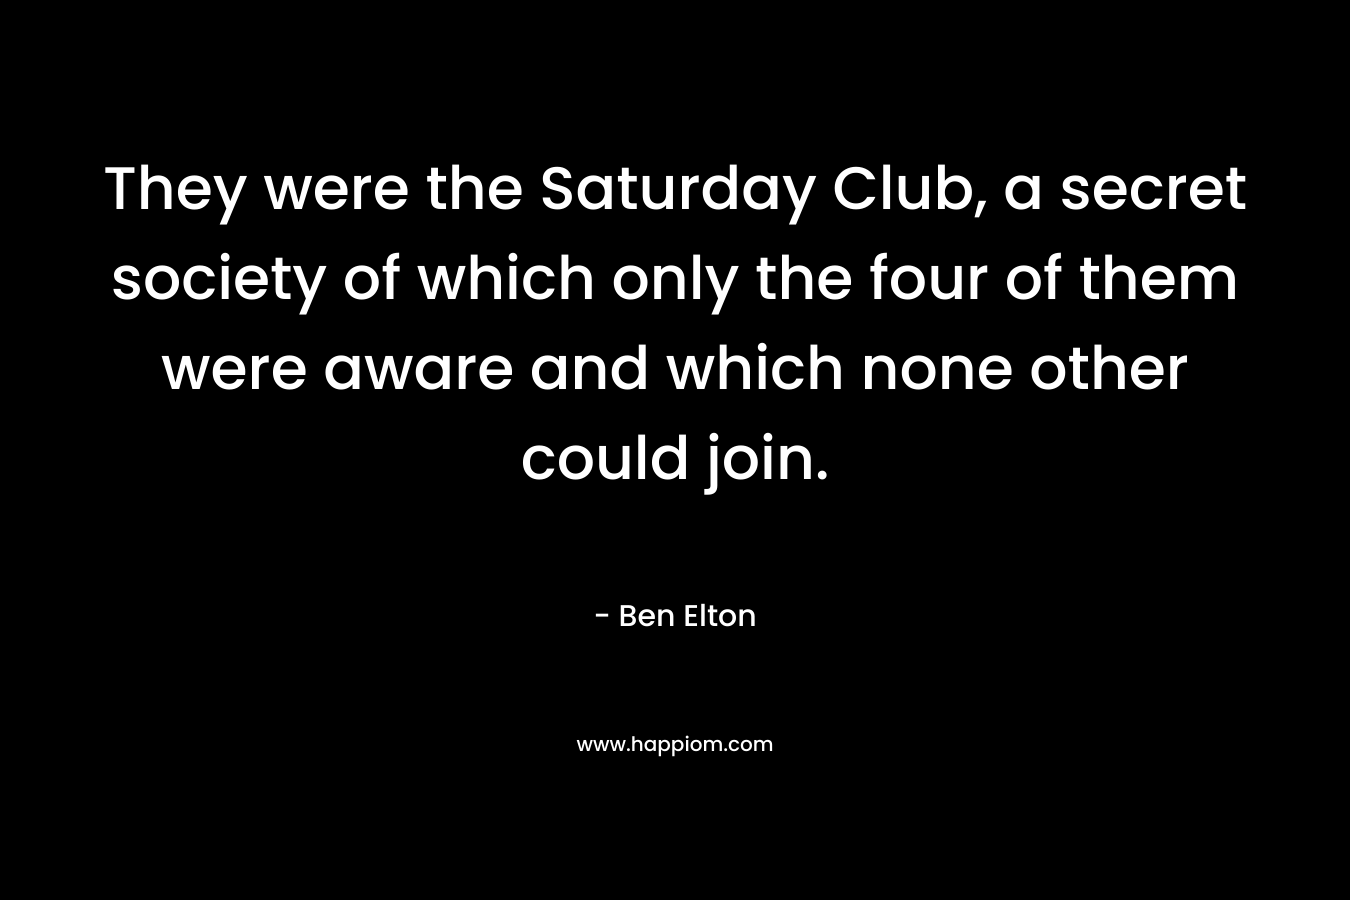 They were the Saturday Club, a secret society of which only the four of them were aware and which none other could join. – Ben Elton